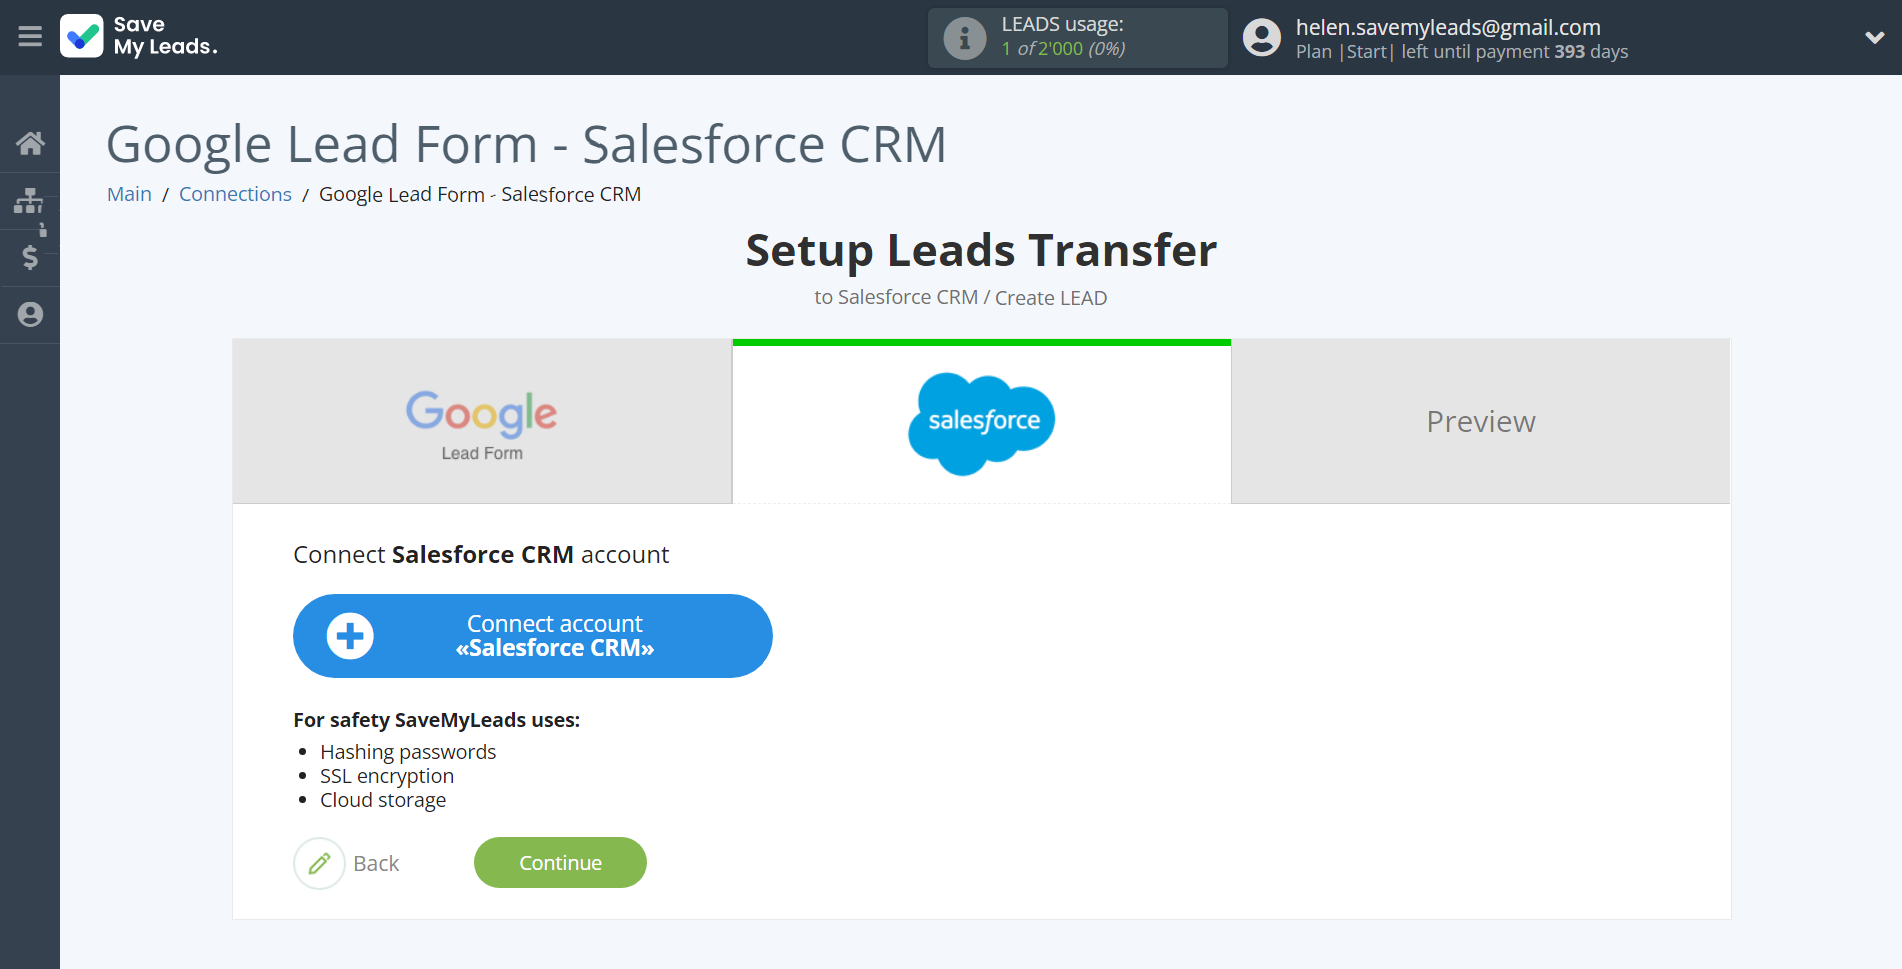 How to Connect Google Lead Form with Salesforce CRM Create Lead | Data Destination account connection